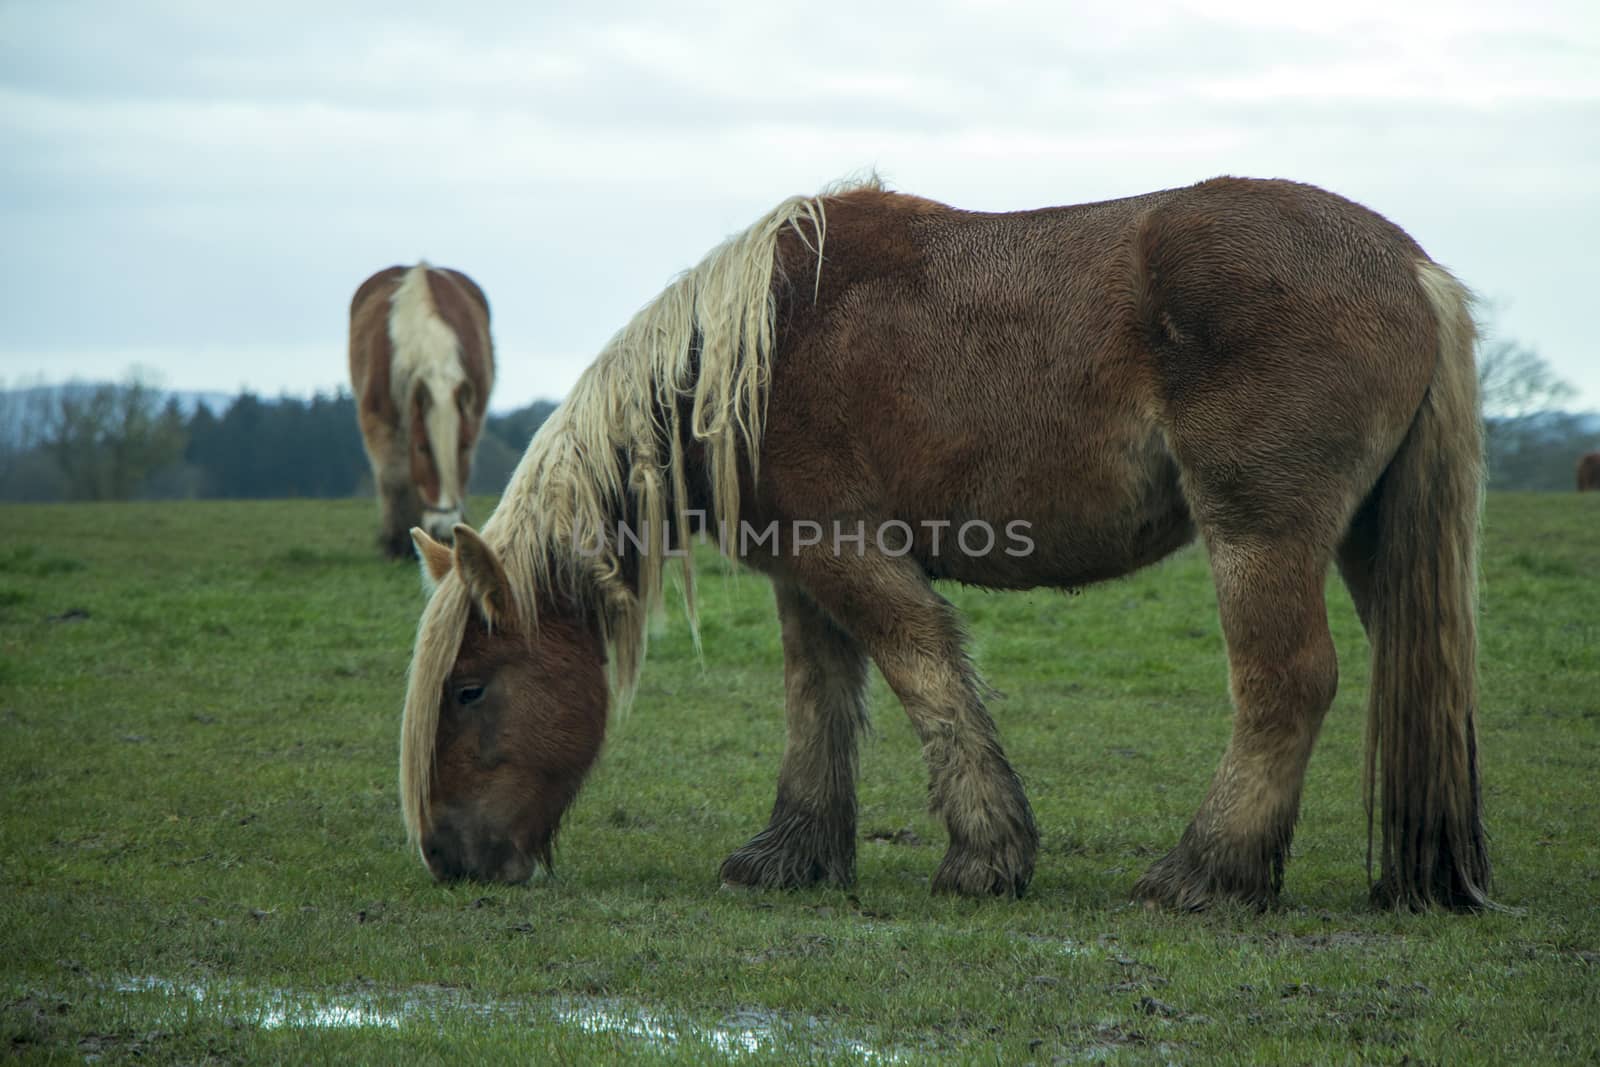 Jutland horses eating green grass on field on a cloudy day, Equus ferus caballus